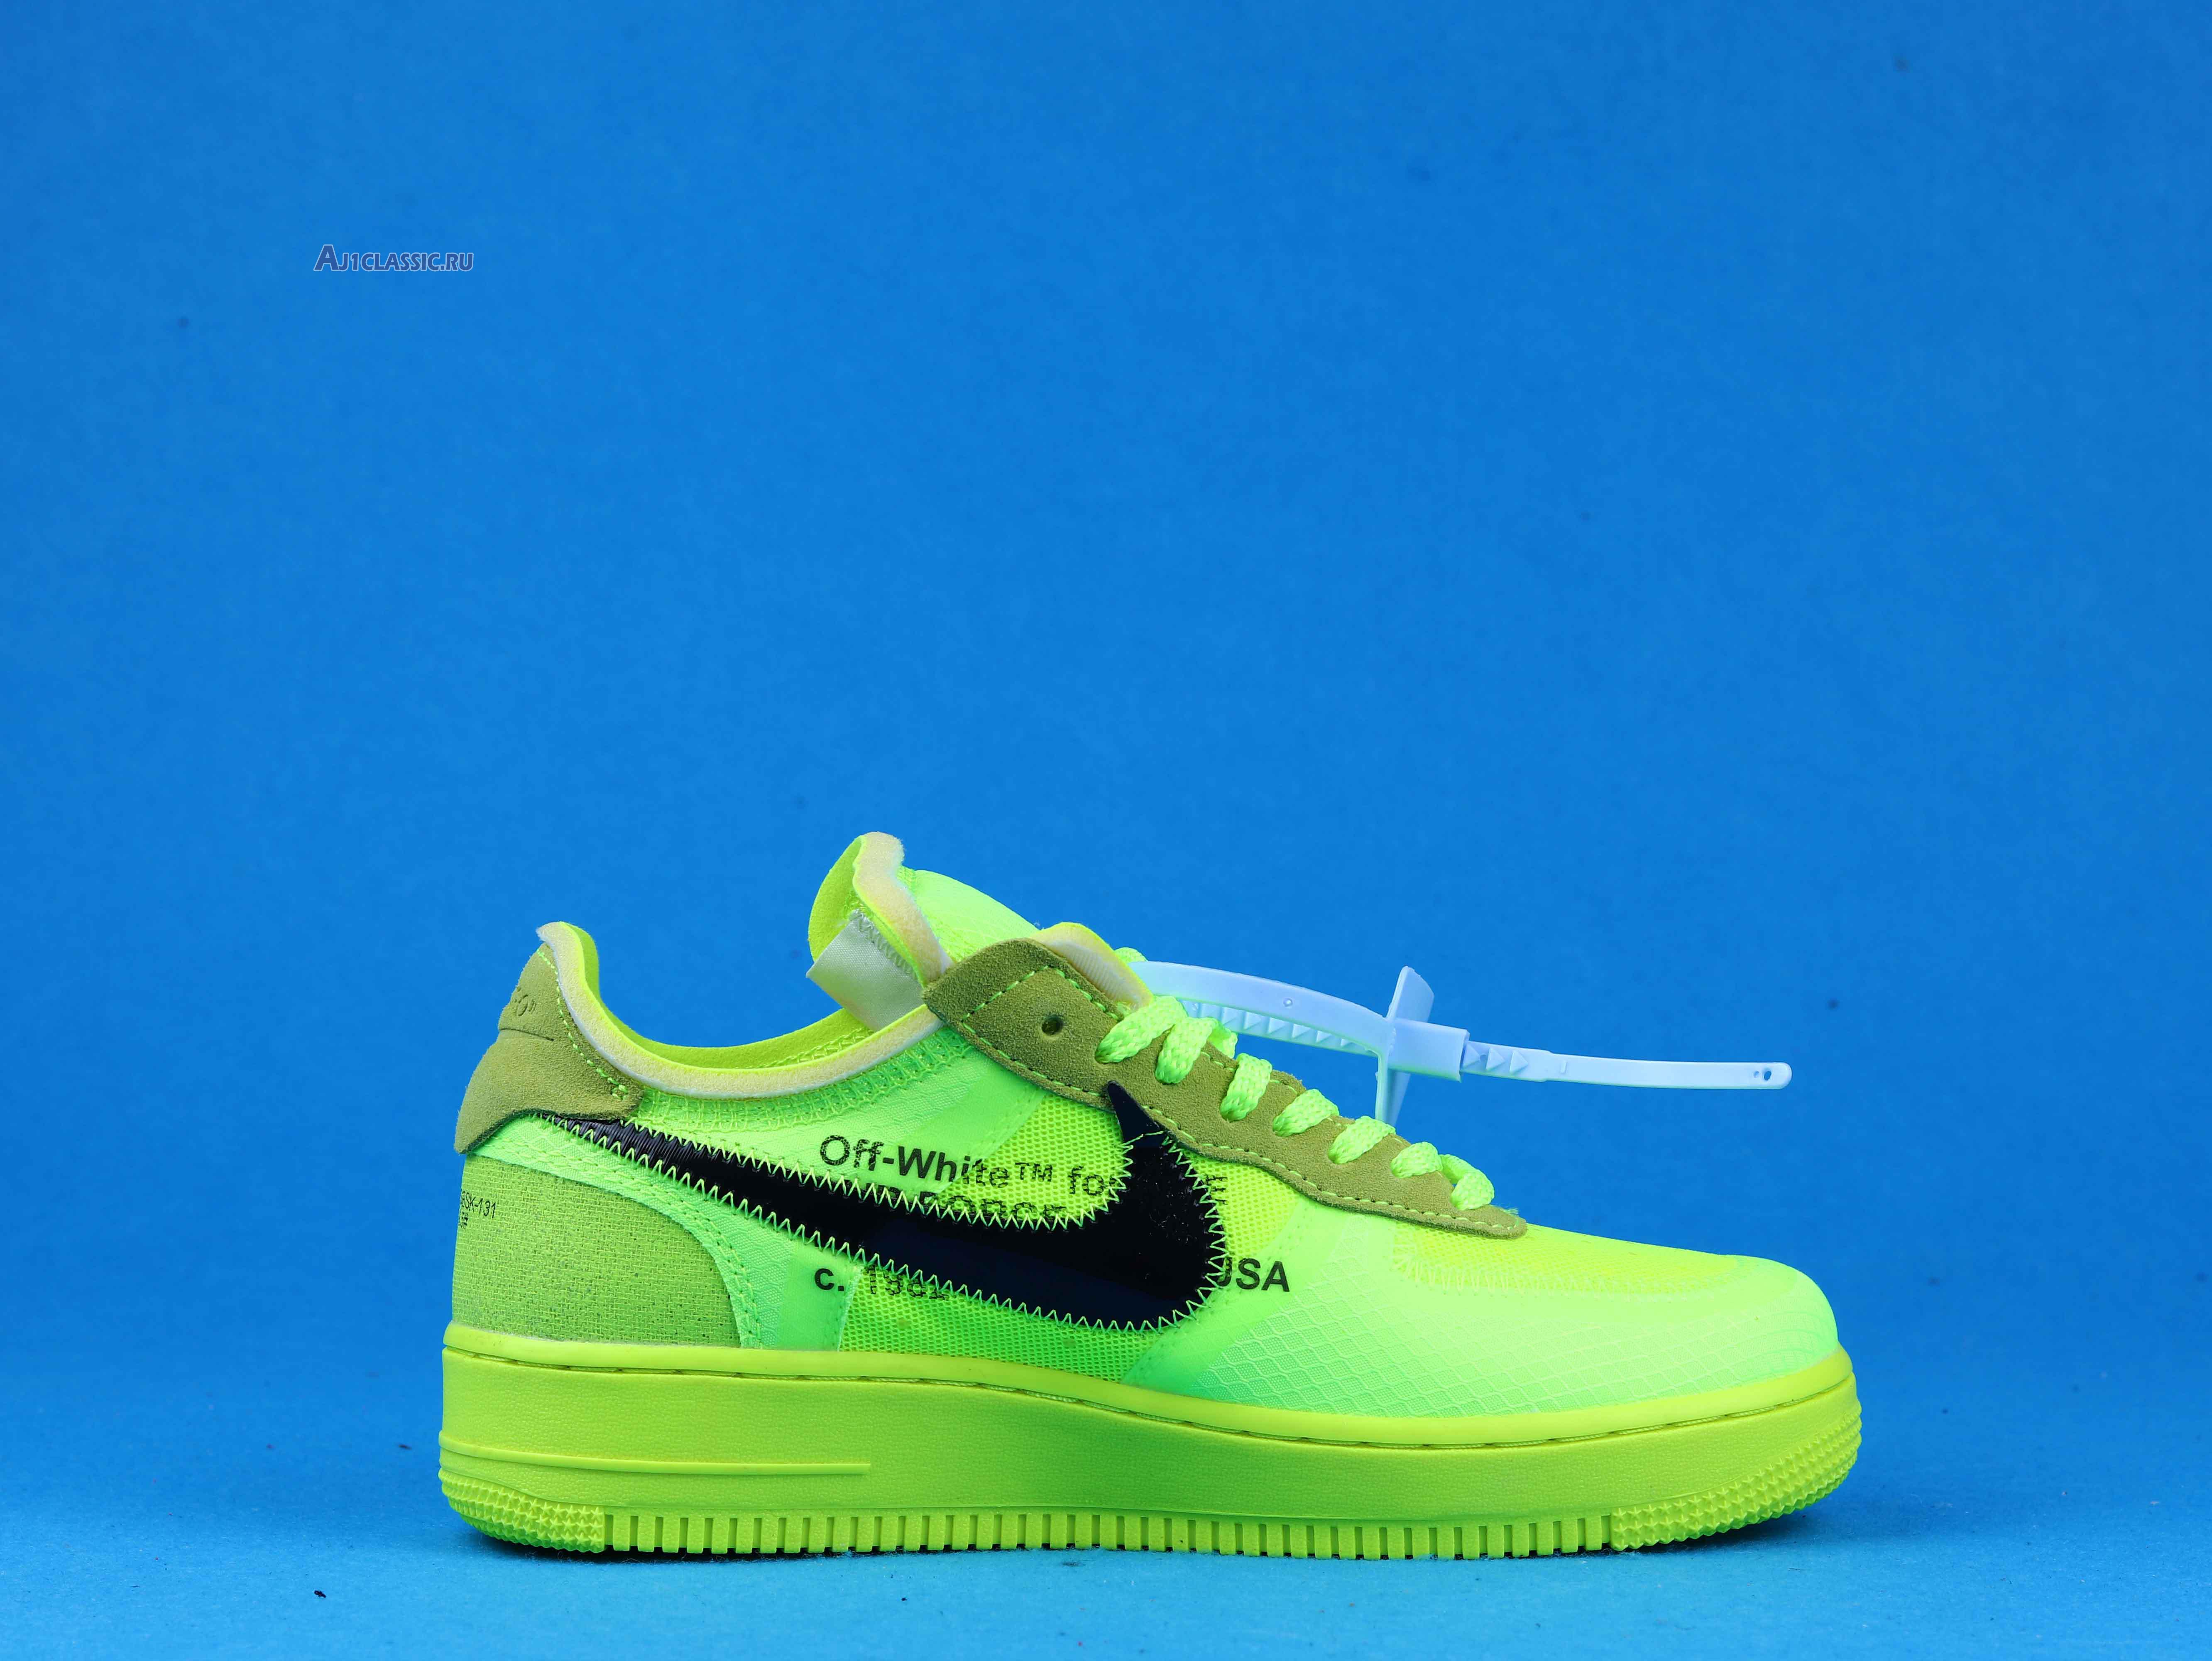 Off-White x Nike Air Force 1 Low "Volt" AO4606-700